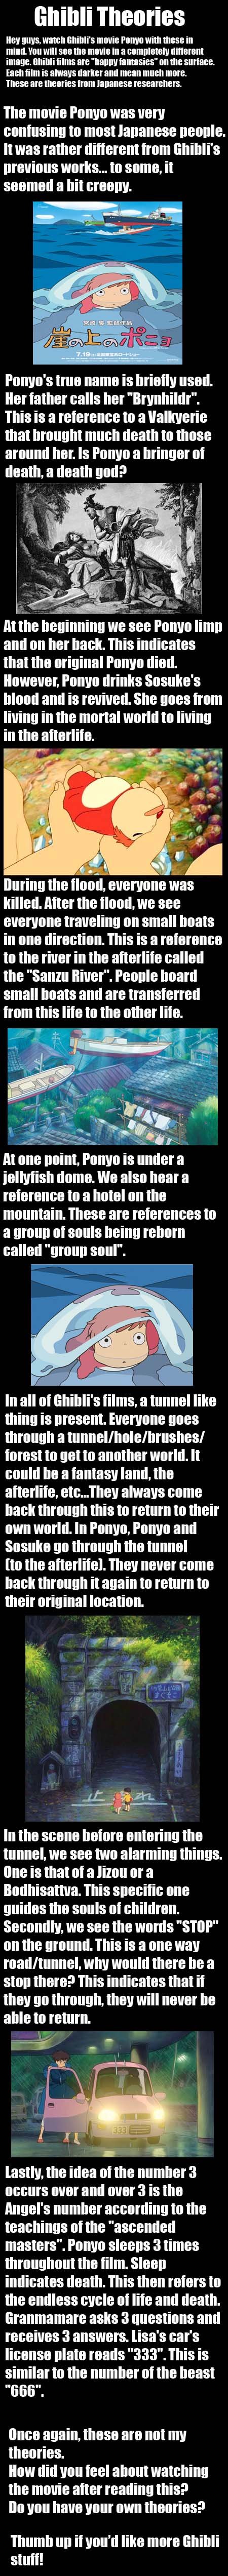 Death God Ponyo. Studi Ghibli films are &quot;simple fantasies&quot; on the surface, but the true story is hidden deep inside. These are just theories that Japa